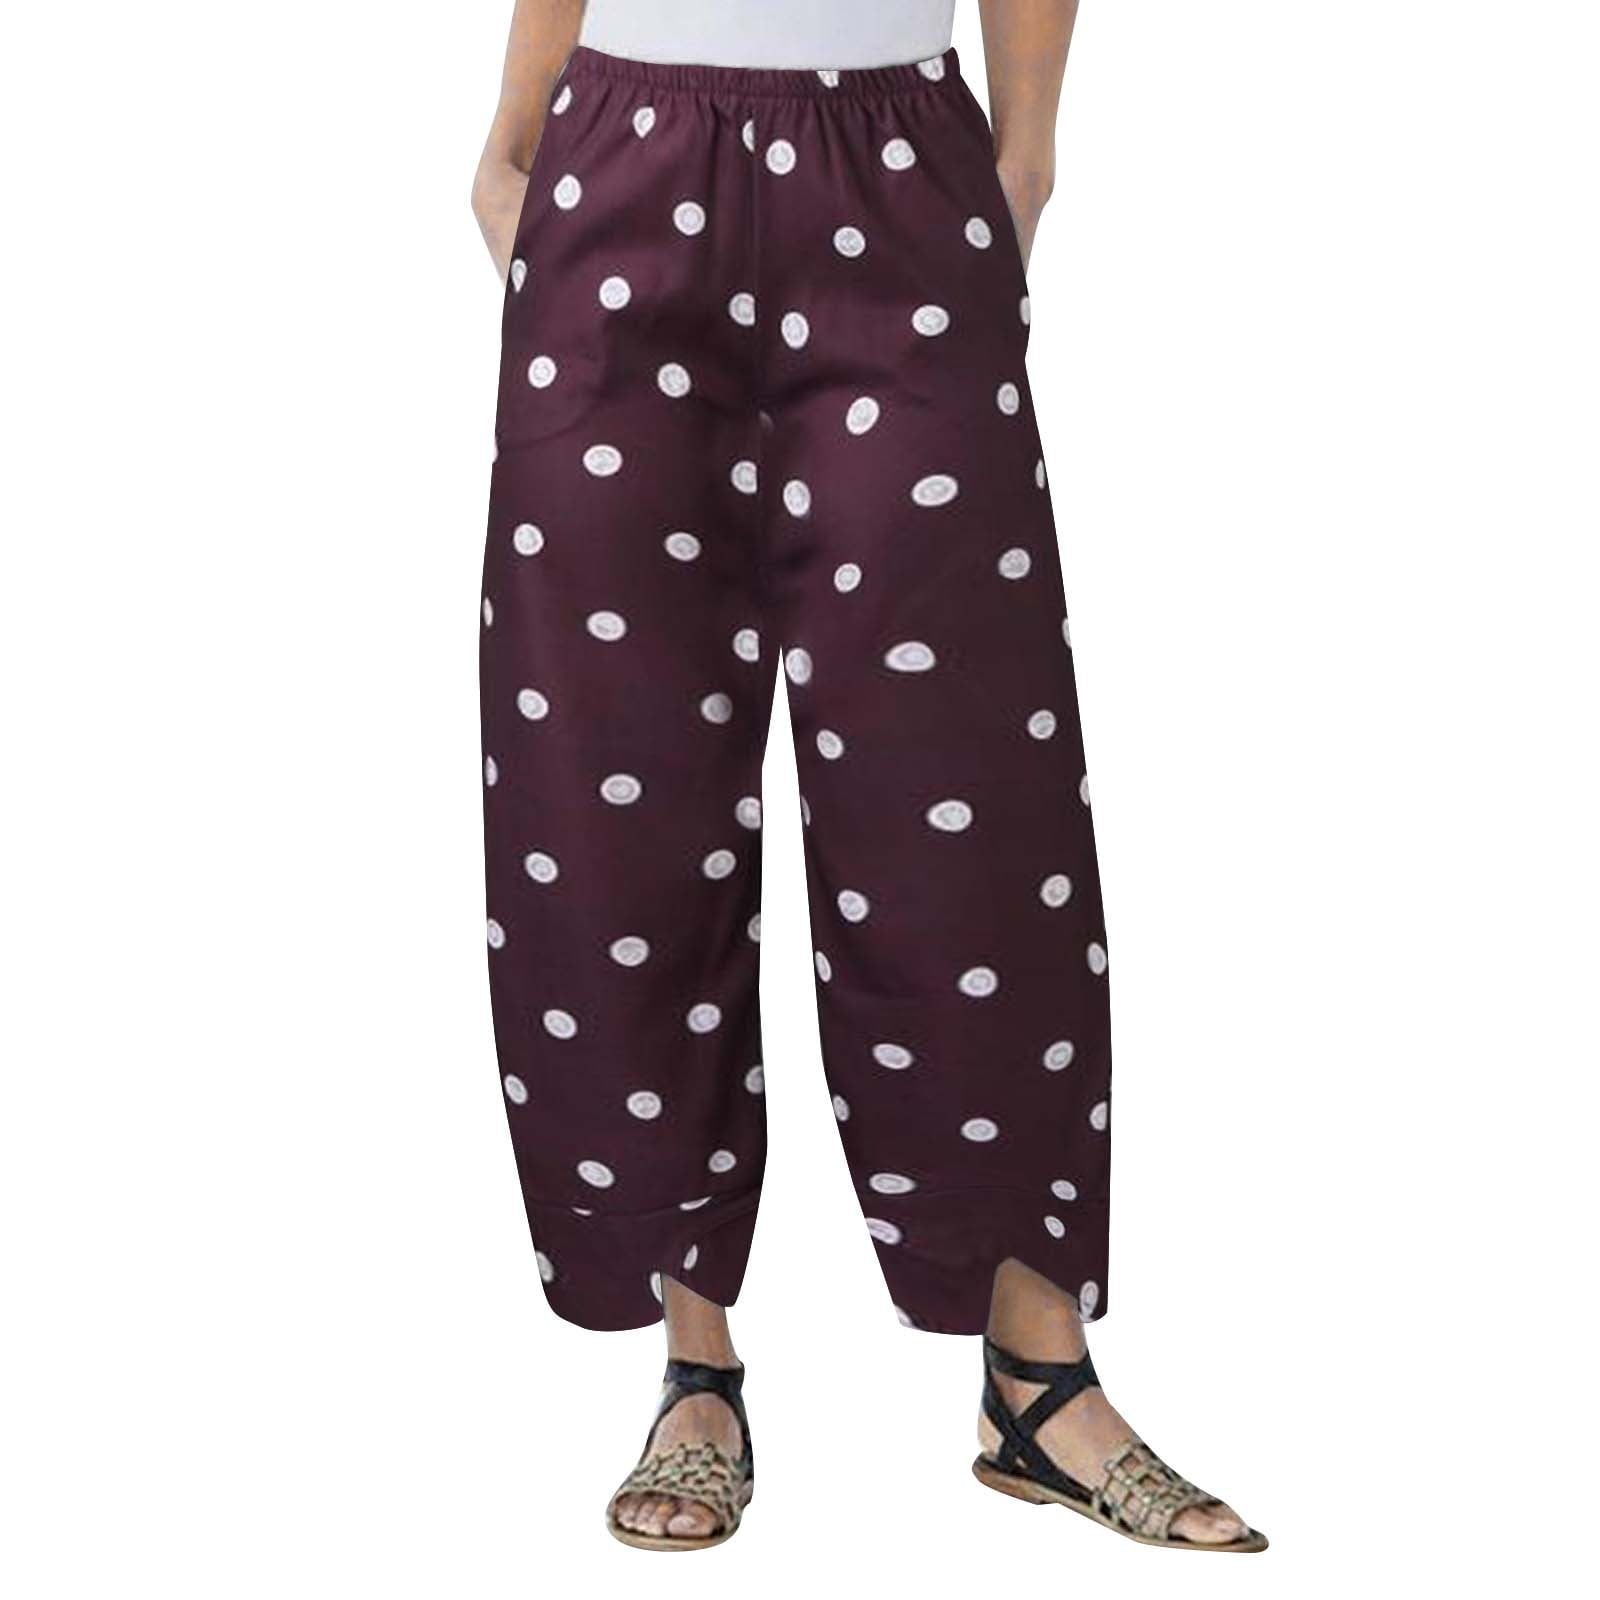 ERTUTUYI Women's Loose Casual Polka Dot Printed Stitched Pants 